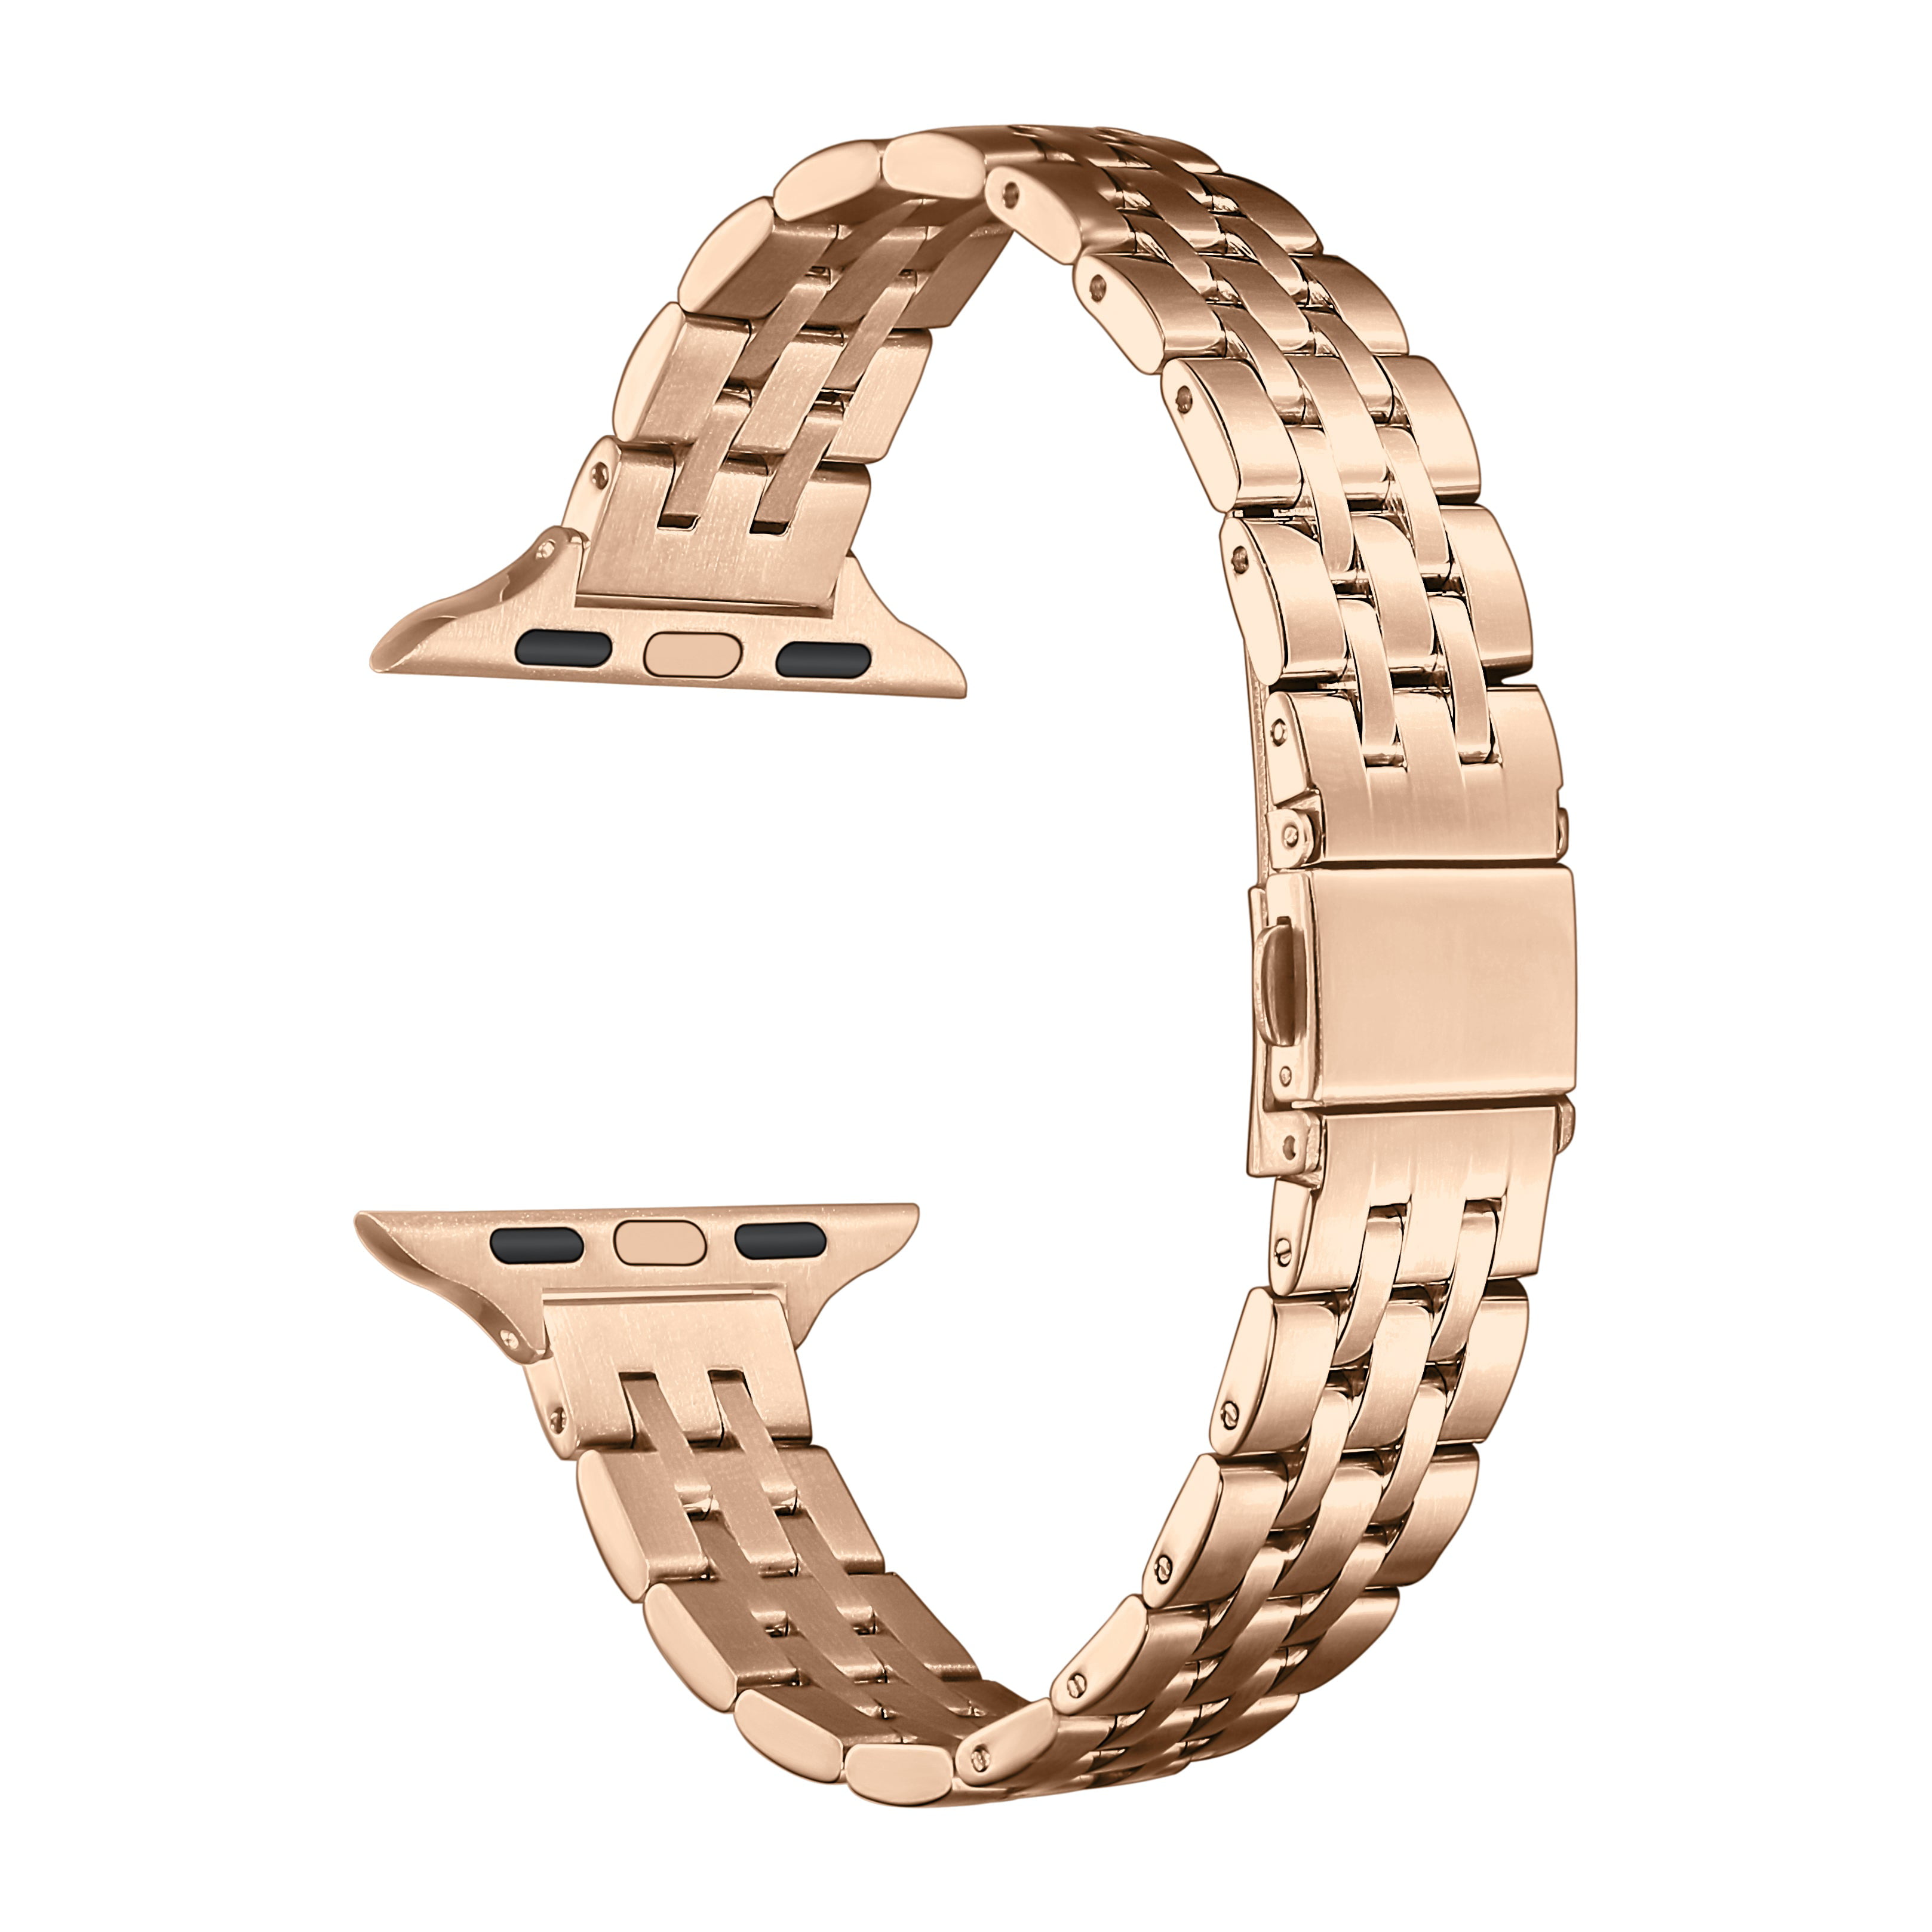 Posh Tech Unisex Tess Stainless Steel Band for Apple Watch Sizes